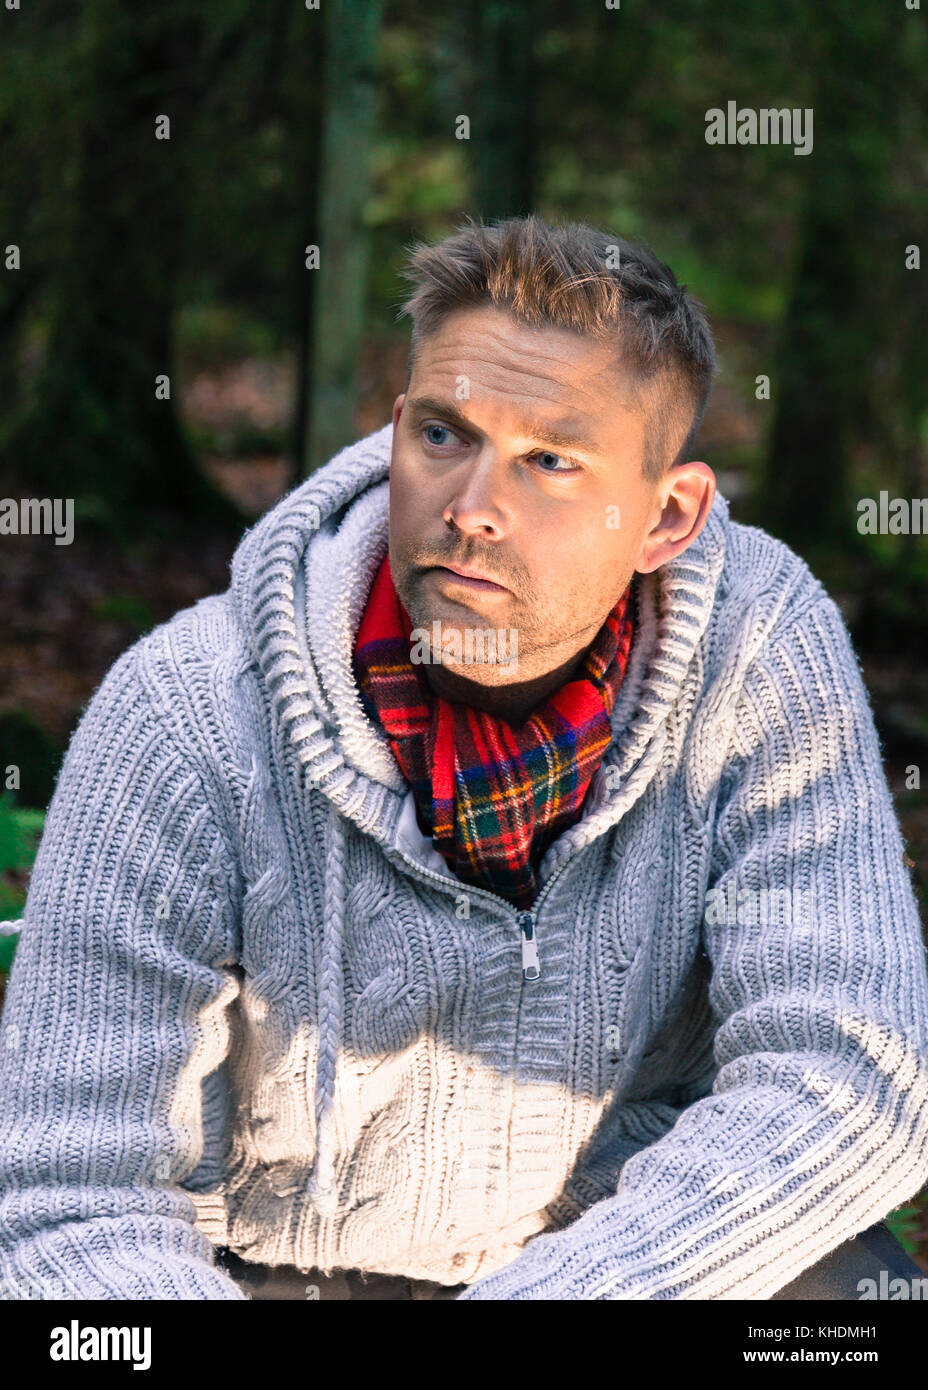 Mid adult man in woods lifestyle portrait wearing knitted jumper and red scarf looking away  Model Release: Yes.  Property Release: No. Stock Photo